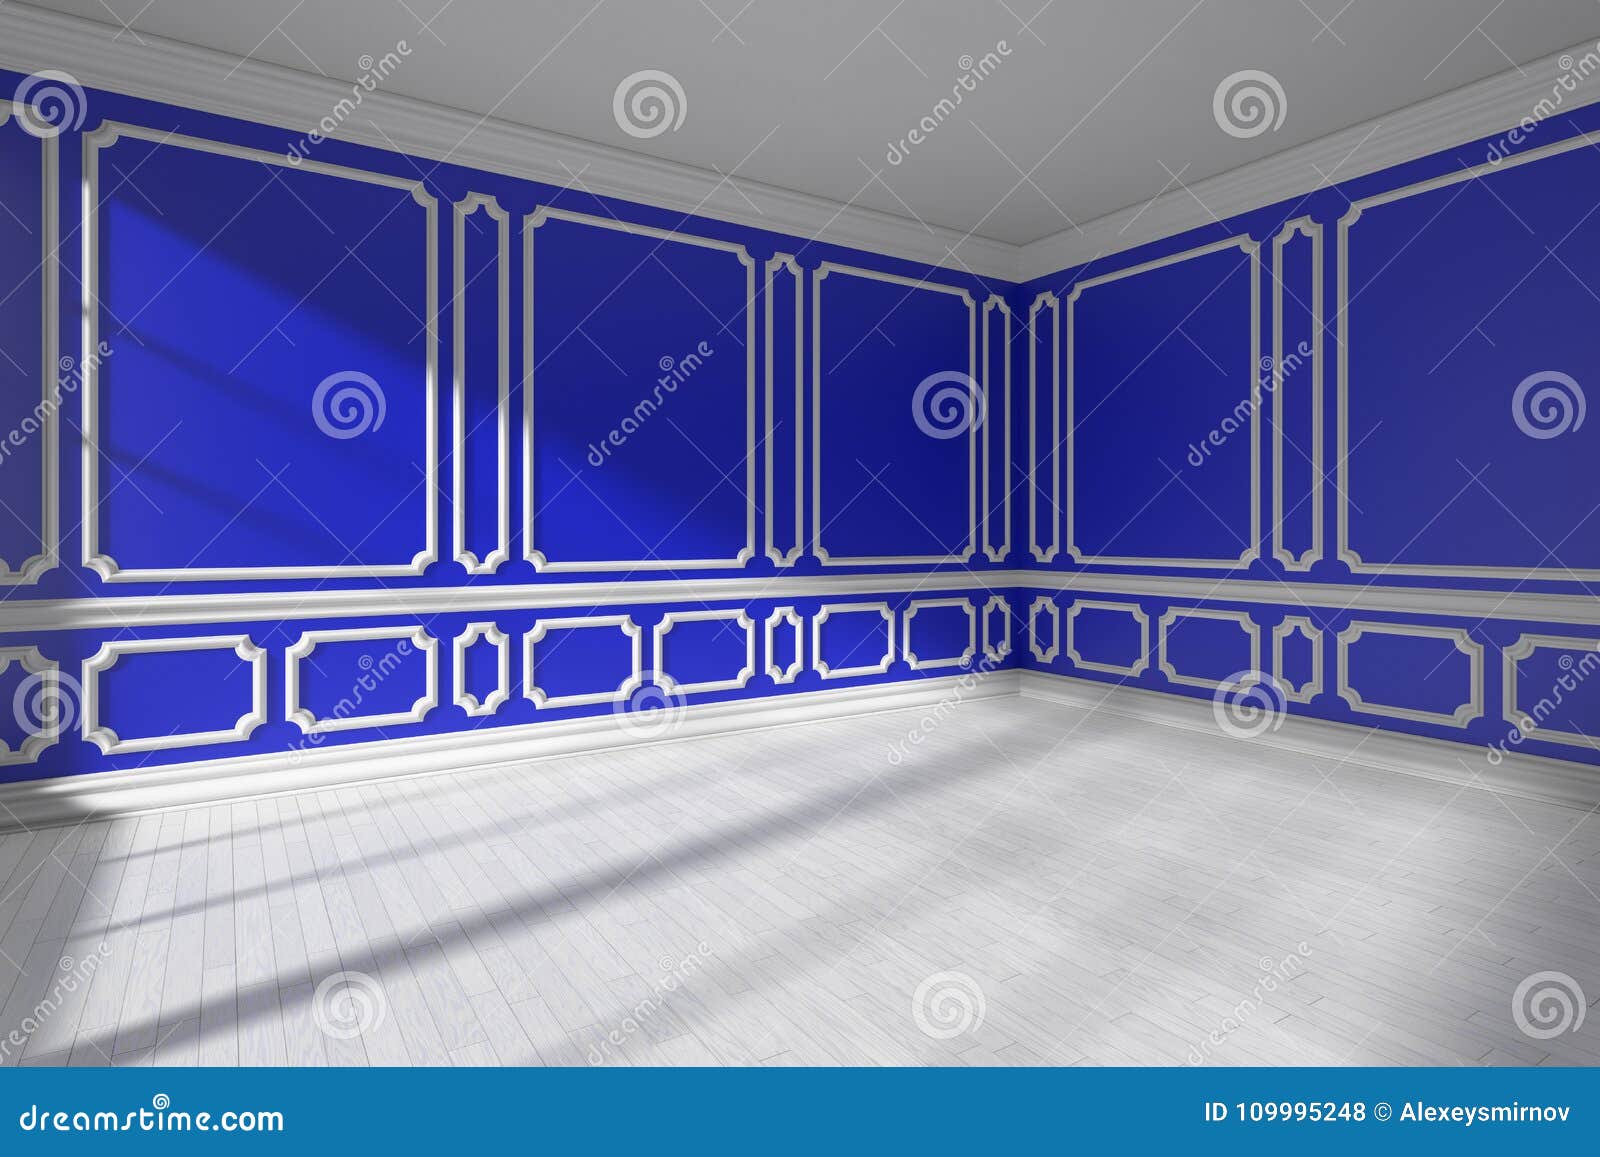 Blue Room With Molding And White Parquet Wide Angle Stock